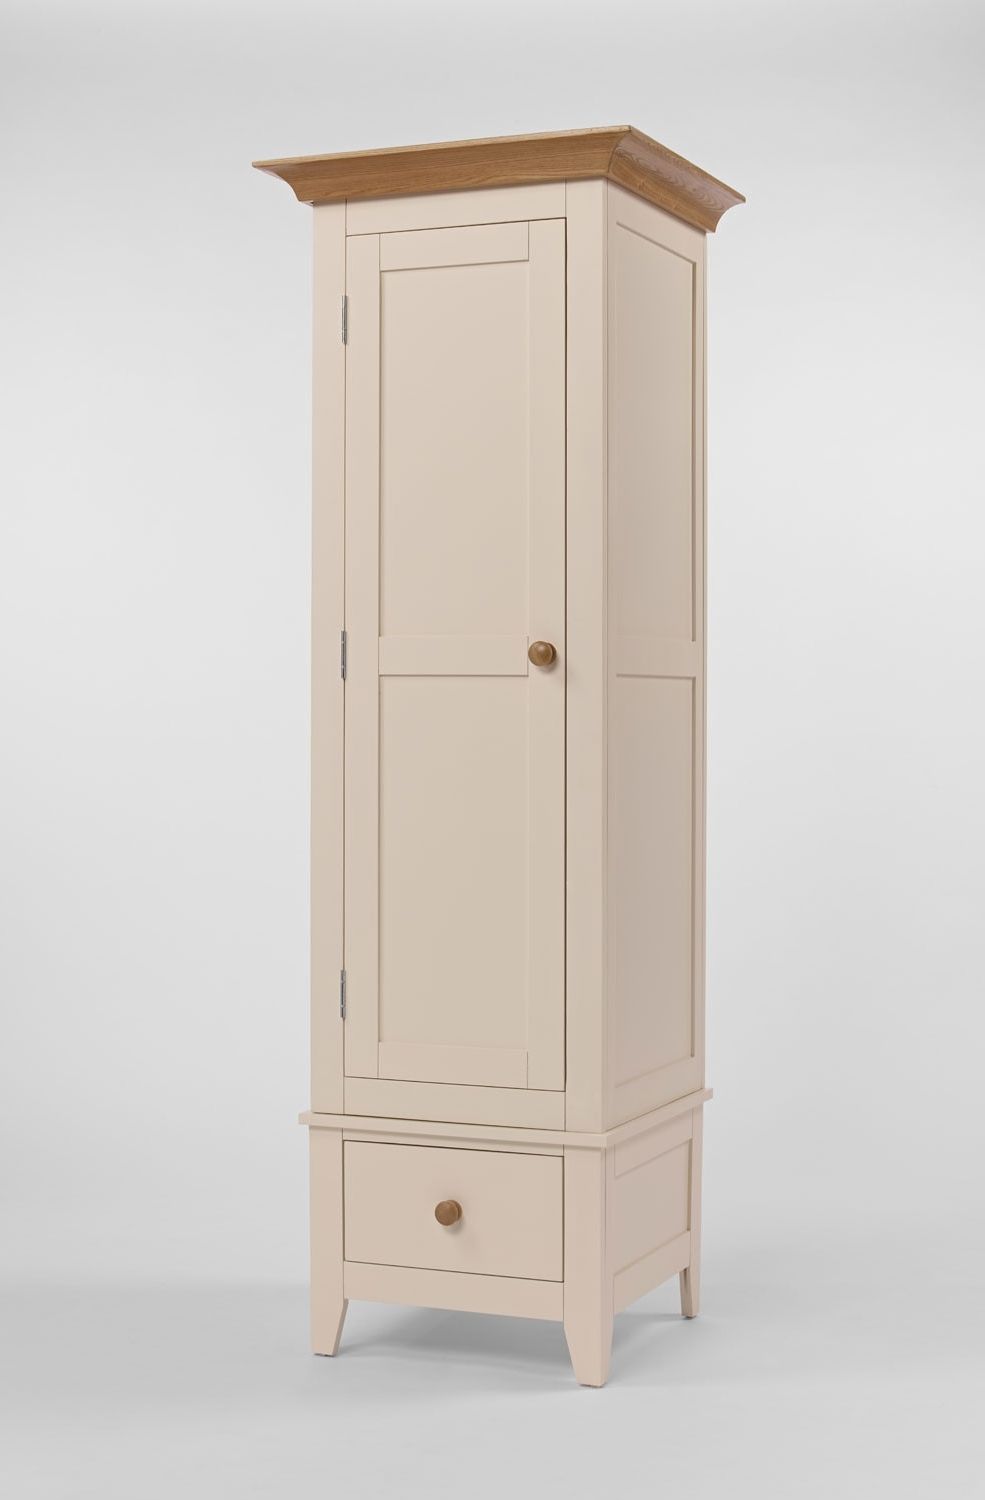 [%camden Painted Pine & Ash Single Wardrobe. Up To 50% Off! Pertaining To Most Up To Date Pine Single Wardrobes|pine Single Wardrobes In Most Current Camden Painted Pine & Ash Single Wardrobe. Up To 50% Off!|popular Pine Single Wardrobes For Camden Painted Pine & Ash Single Wardrobe. Up To 50% Off!|most Recent Camden Painted Pine & Ash Single Wardrobe (View 2 of 15)